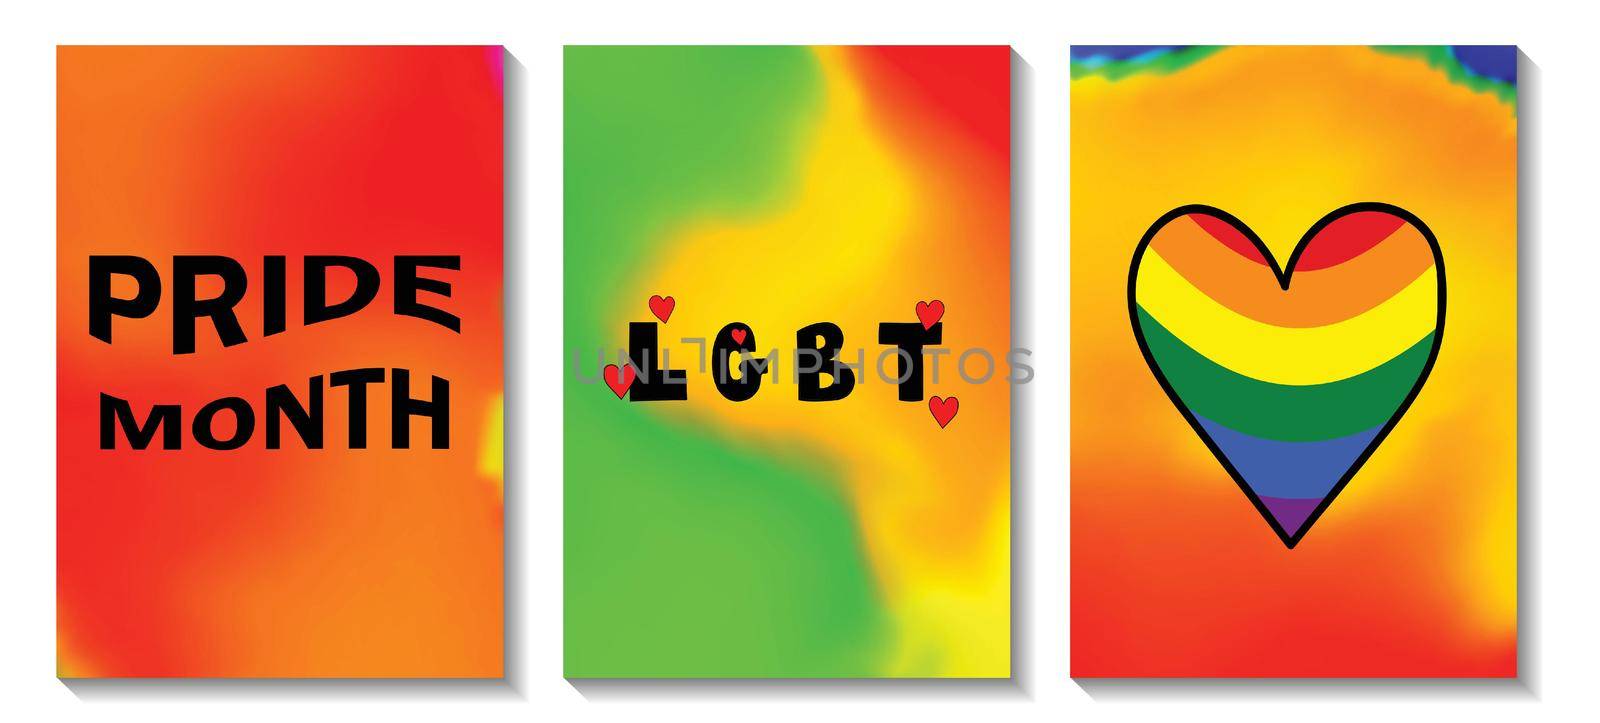 Gay pride month poster collection, banner. Lettering LGBT, hearts. Set of LGBT icons. Template design, vector illustration. Love wins. Geometric shapes in the colors on the rainbow. Colorful symbols by allaku